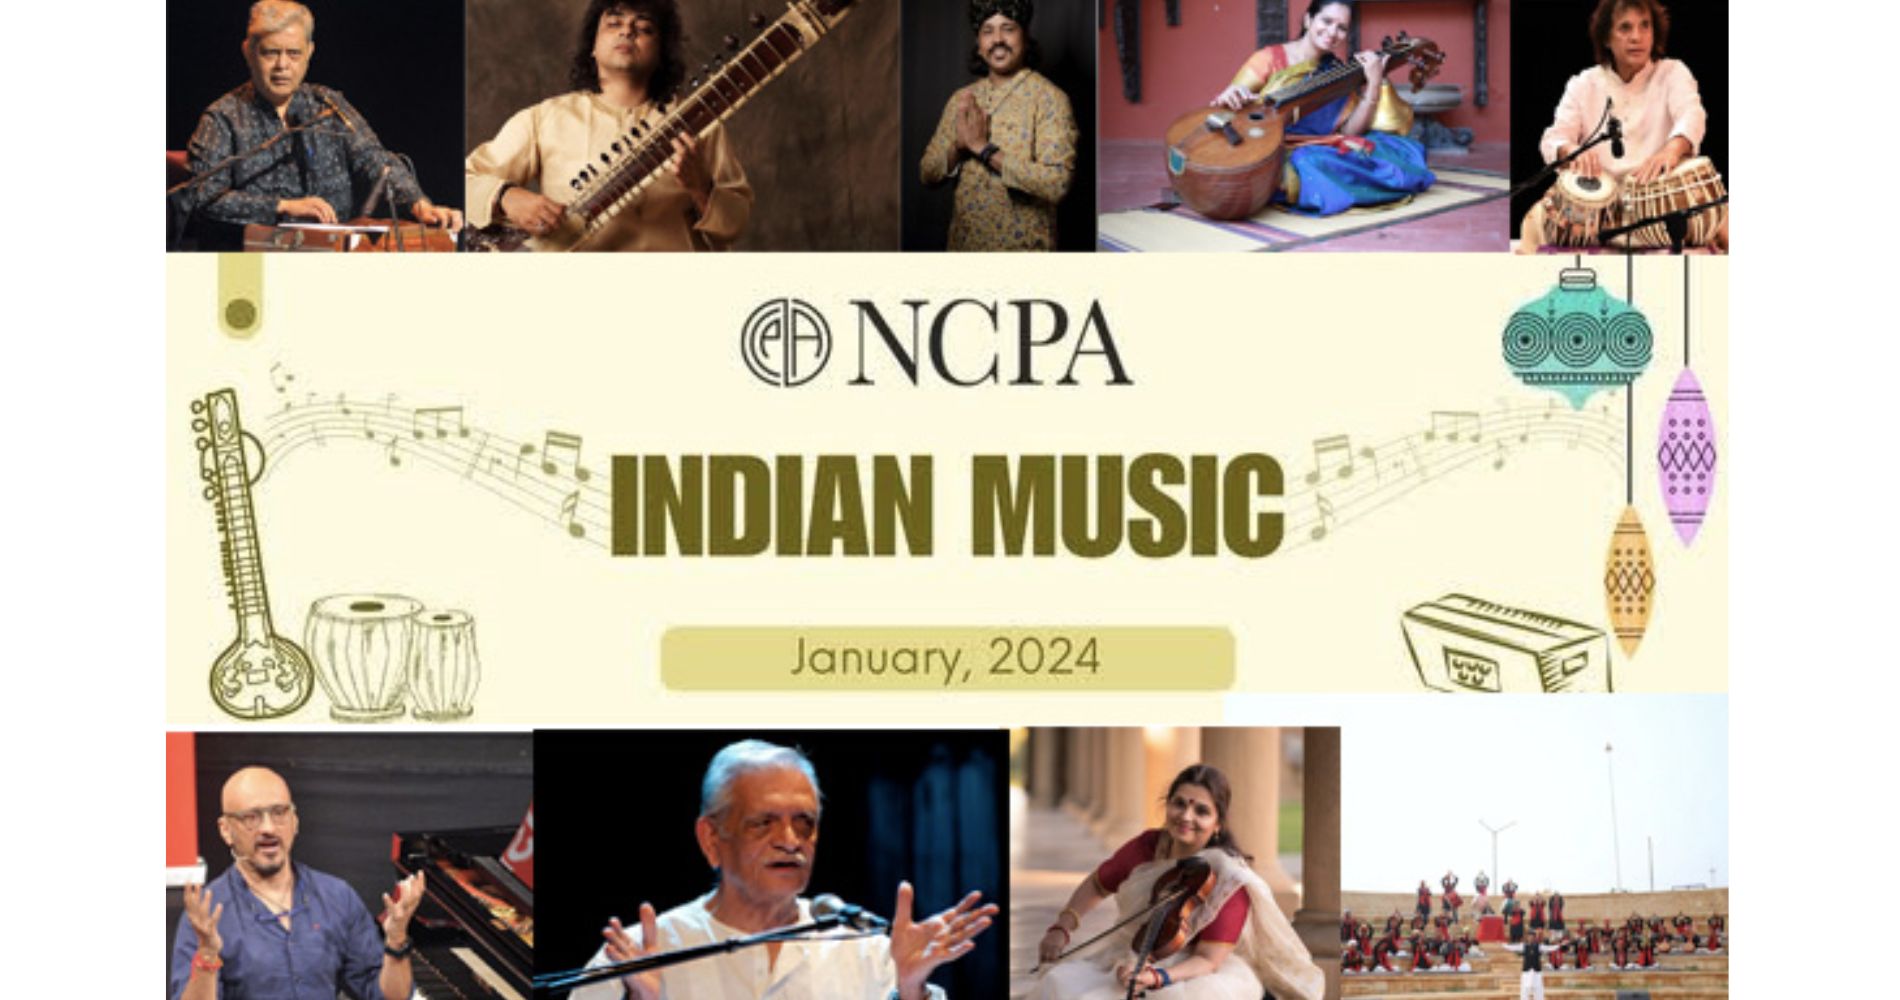 NCPA Unveils Spectacular Indian Music Lineup For 2024